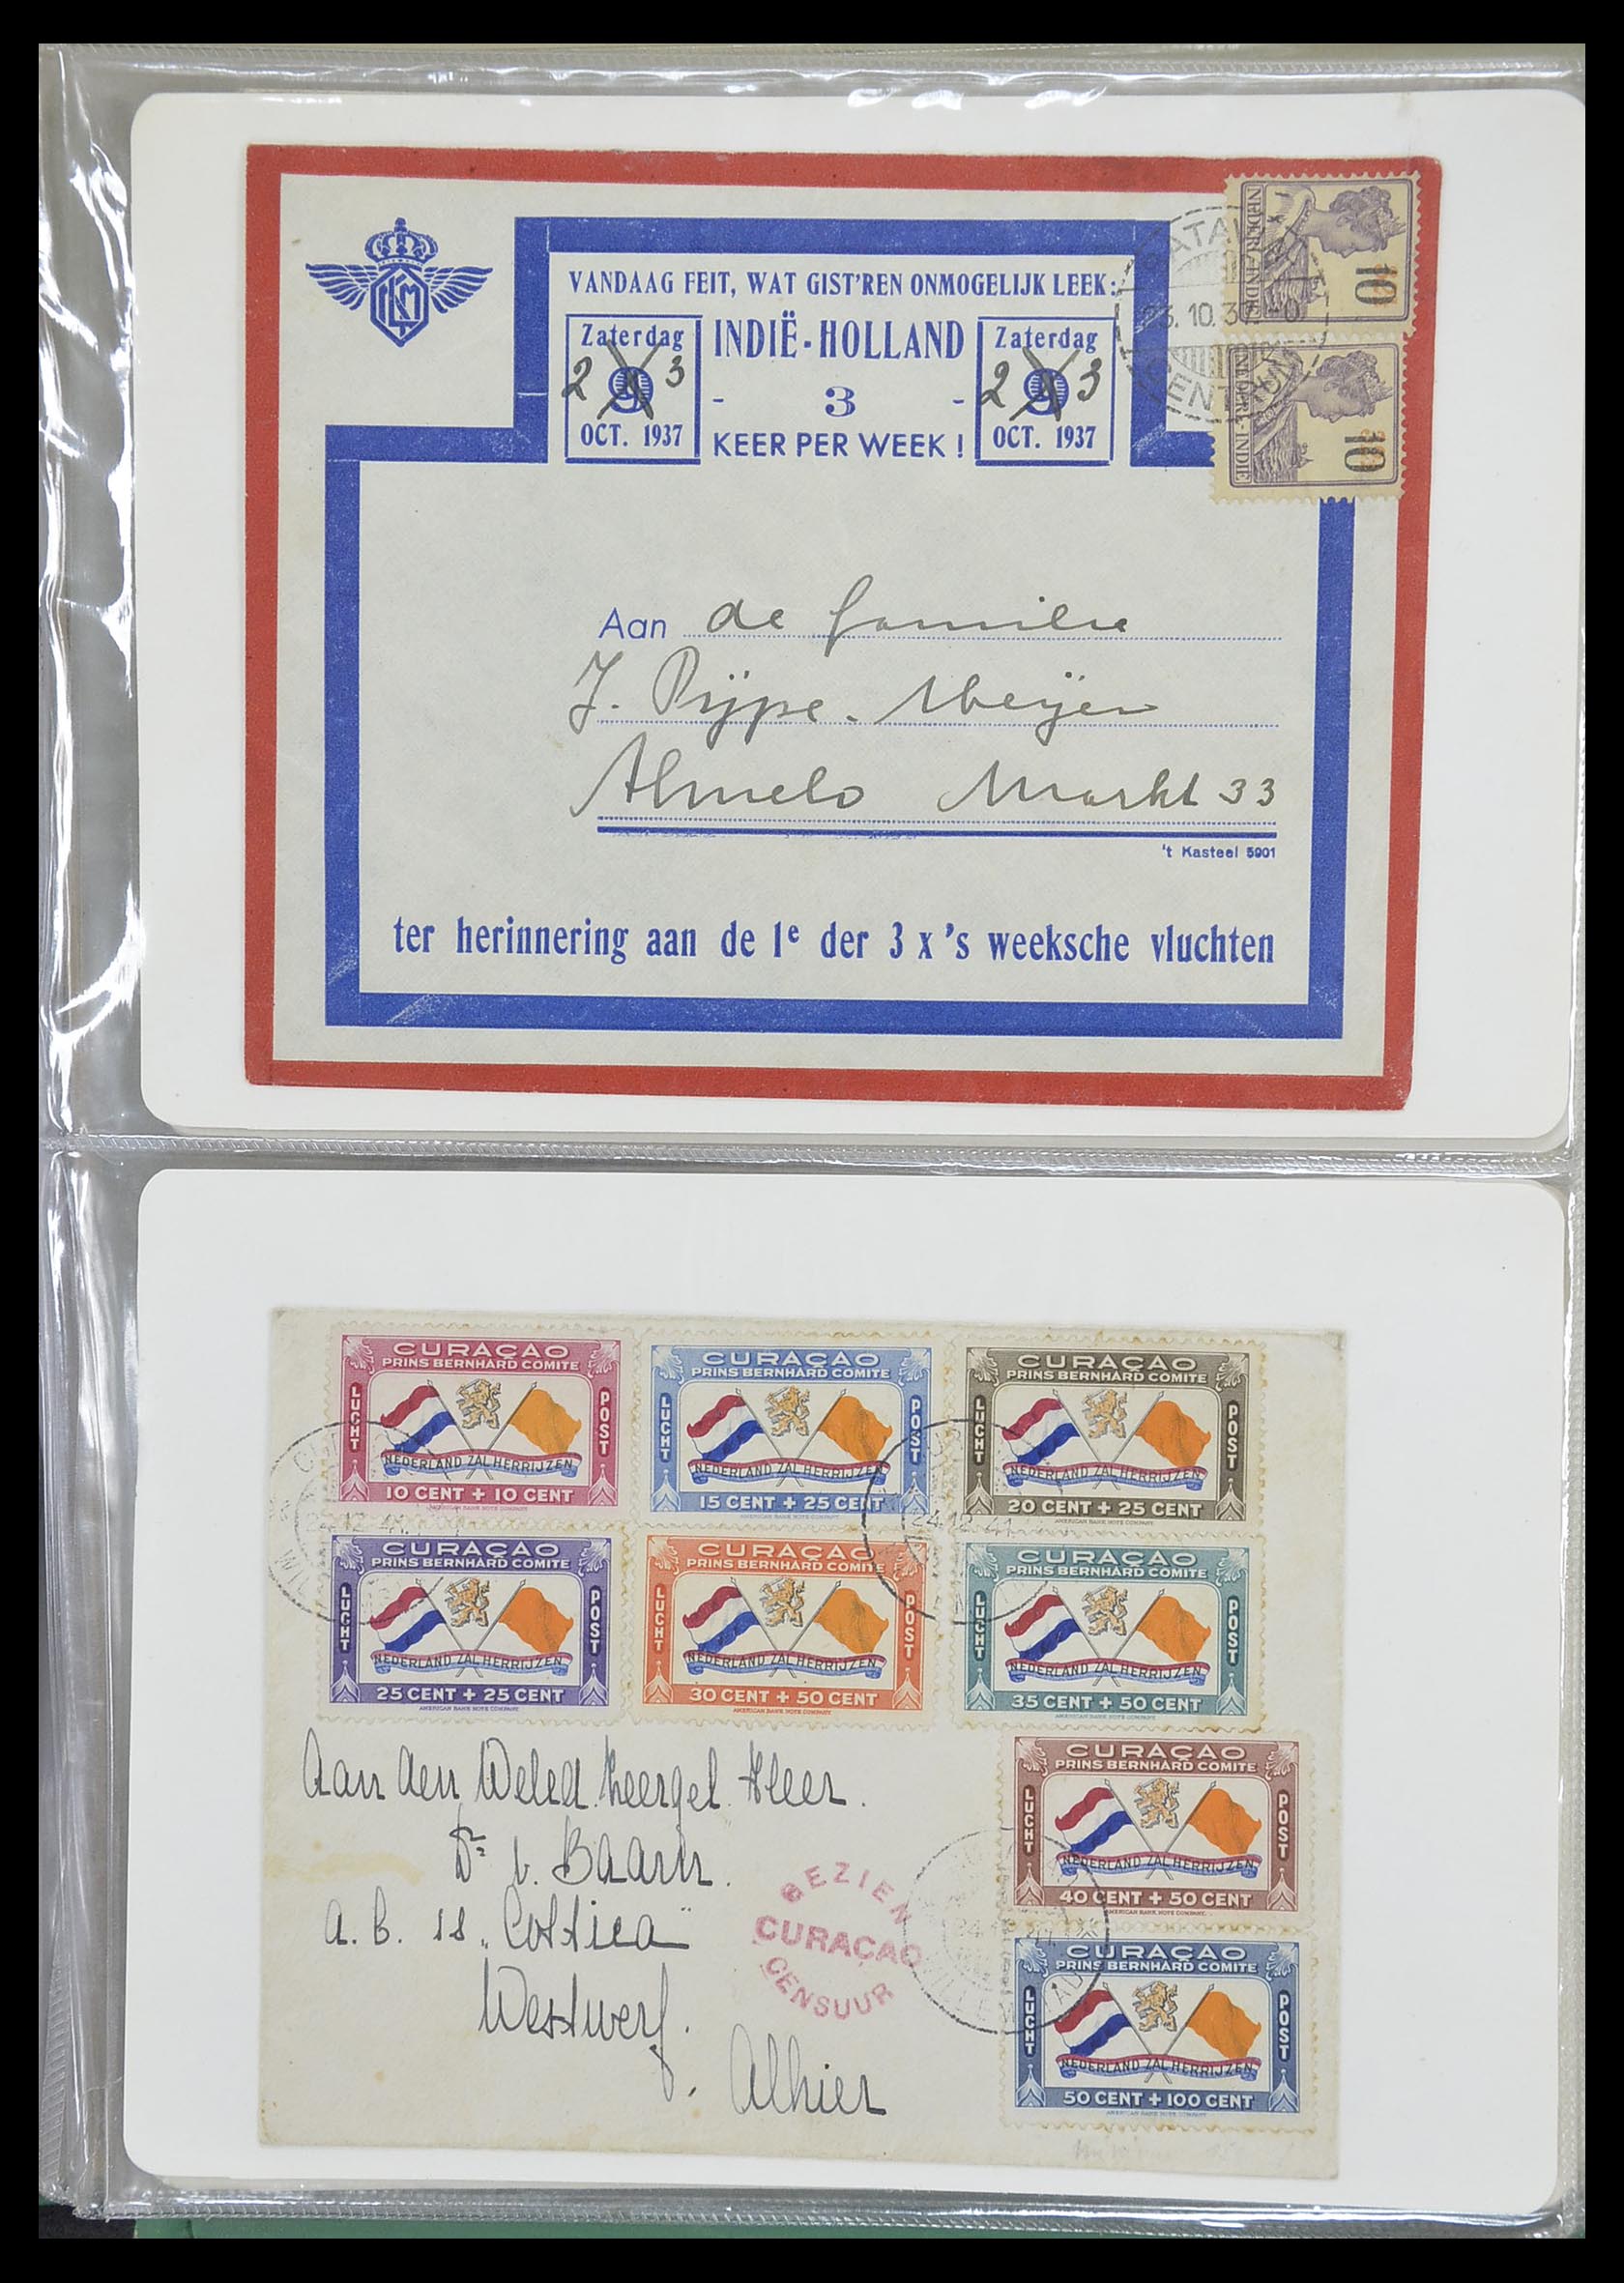 33333 035 - Stamp collection 33333 Dutch territories covers 1873-1959.